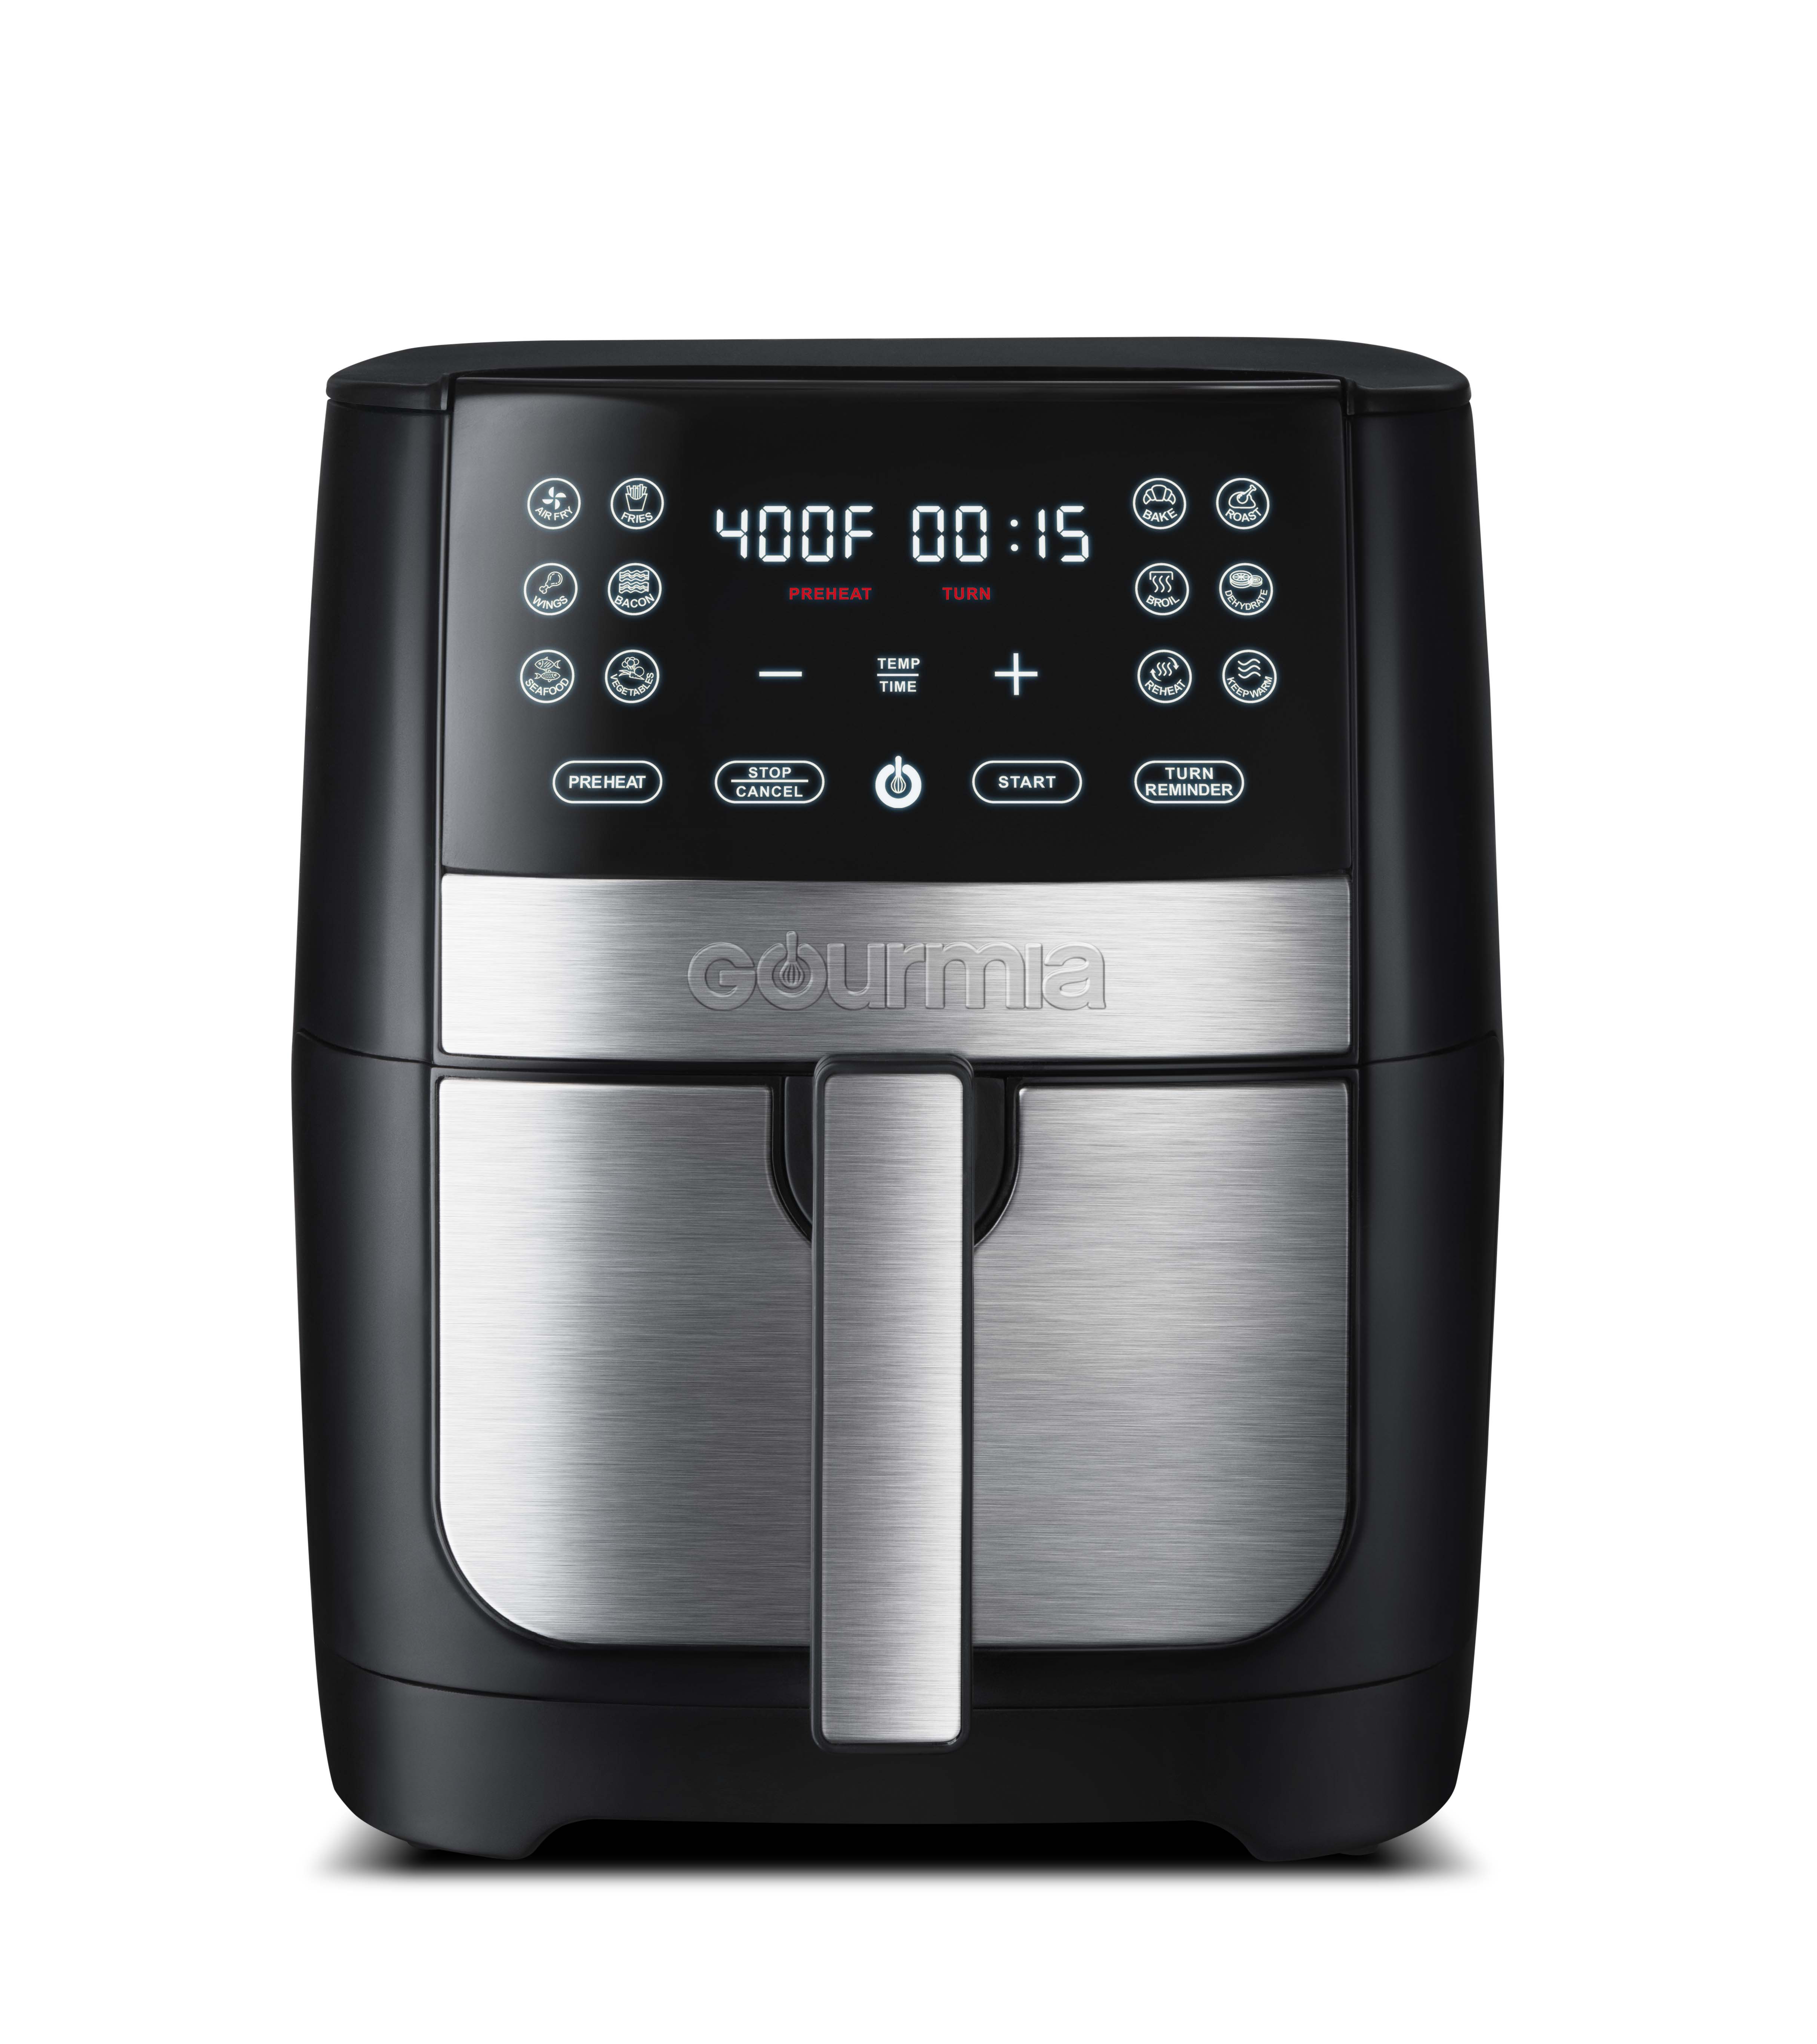 Gourmia 8 Qt Digital Air Fryer with FryForce 360 and Guided Cooking, Black/Stainless Steel, GAF826, 14.82 H, New - image 1 of 3